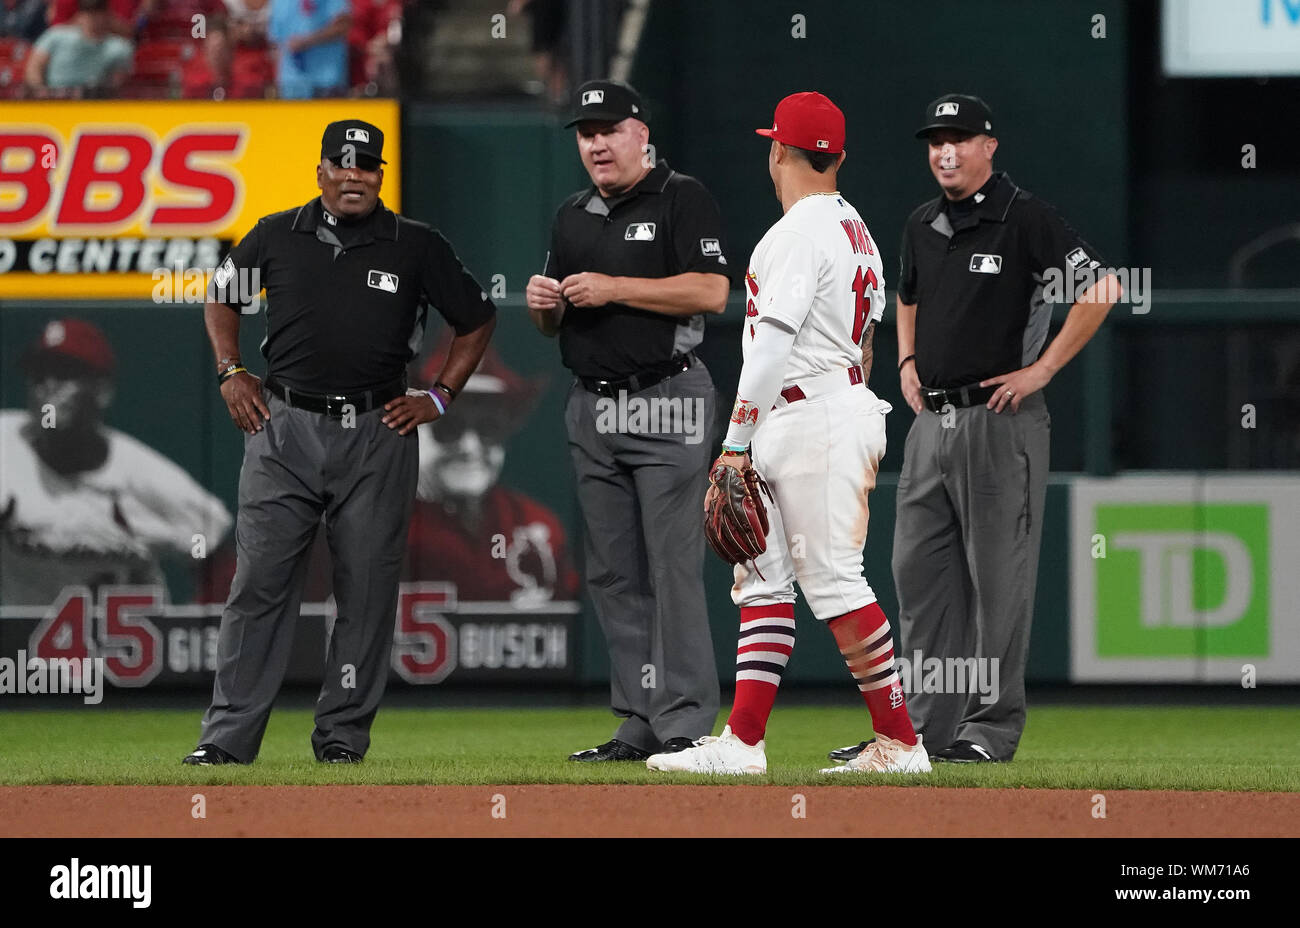 St. Louis, United States. 04th Sep, 2019. Umpires (L to R) Laz Dias, Jeff Nelson and Cory Blaser joke with St. Louis Cardinals second baseman Kolten Wong between innings of a game against the San Francisco Giants at Busch Stadium in St. Louis on Wednesday, September 4, 2019. Photo by Bill Greenblatt/UPI Credit: UPI/Alamy Live News Stock Photo